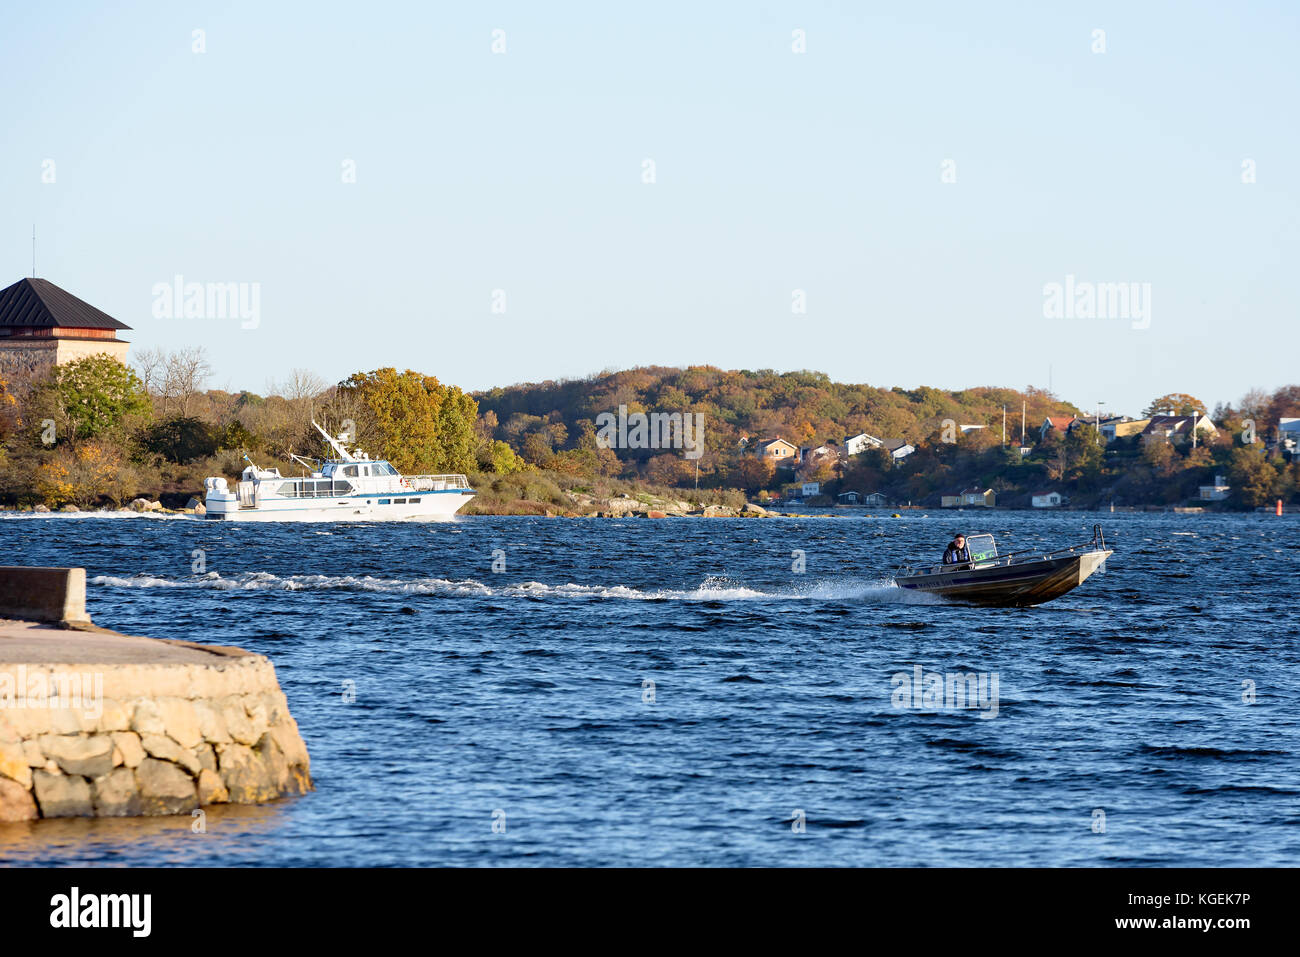 Karlskrona, Sweden - October 30, 2017: Documentary of everyday life and environment. Fisherman in motorboat with fall coastal landscape in background. Stock Photo